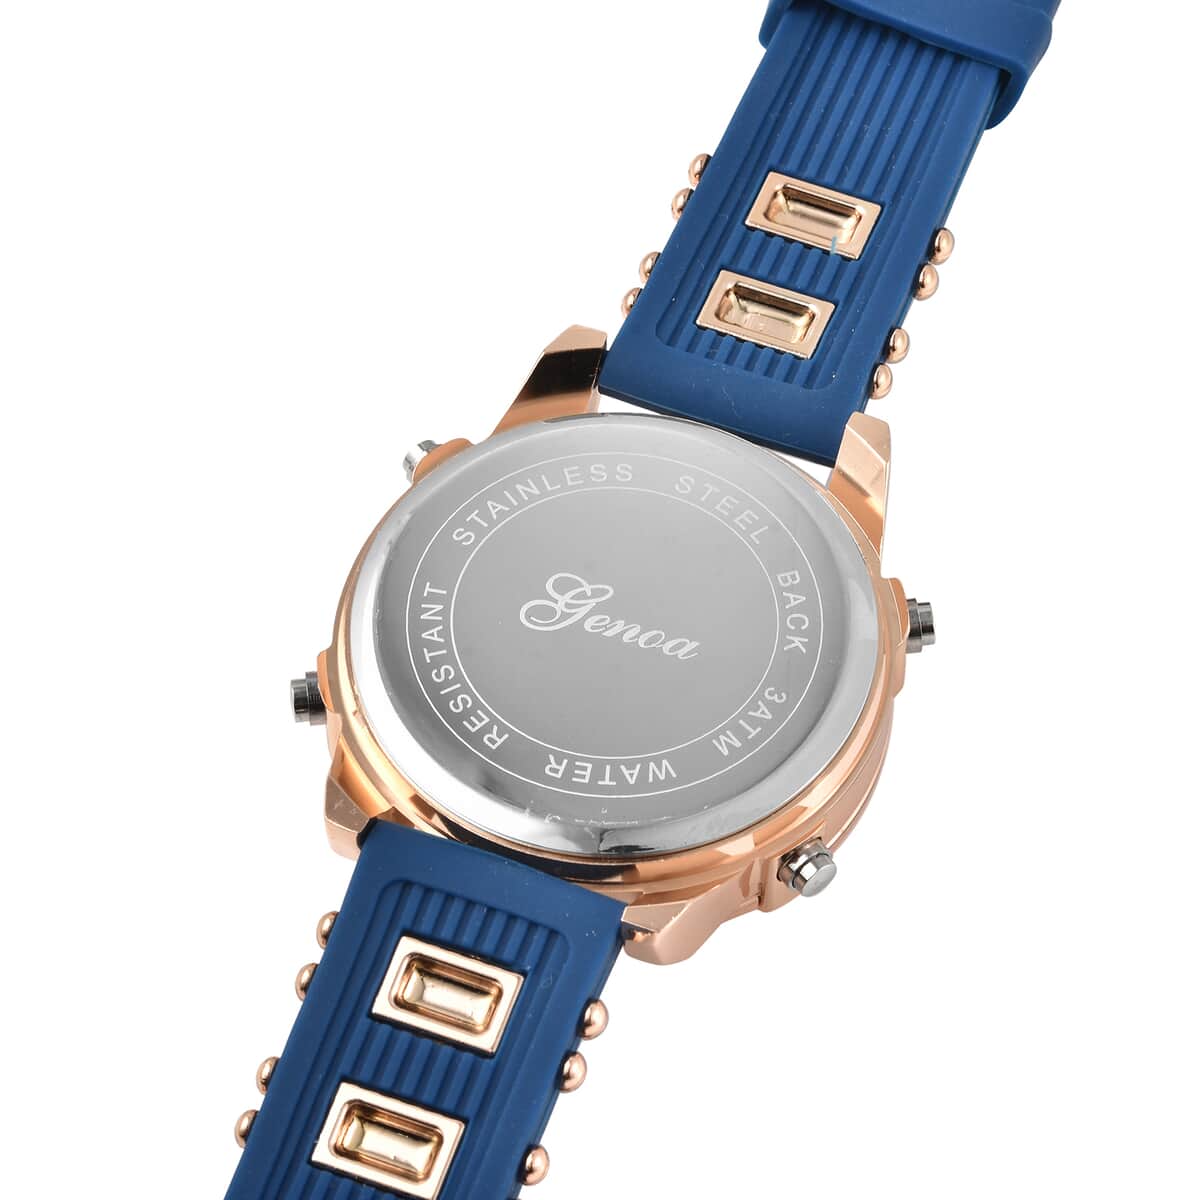 Genoa Miyota Japanese and Electronic Movement Multi Function Watch in Blue Silicone Strap image number 5